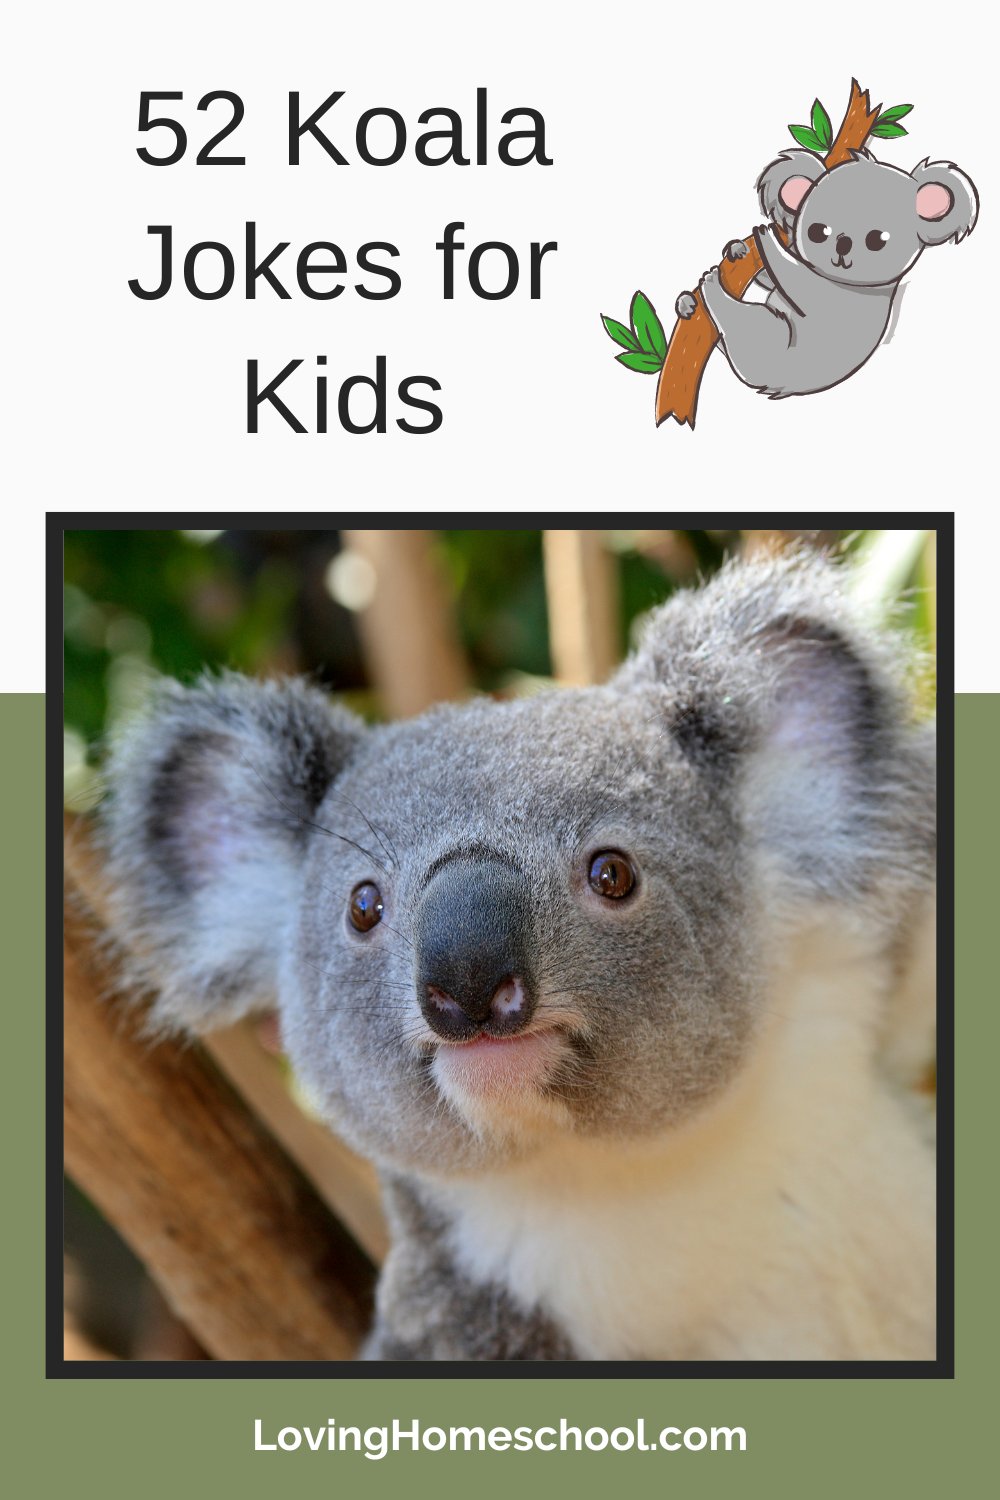 9 Things You Didn't Know About Koalas